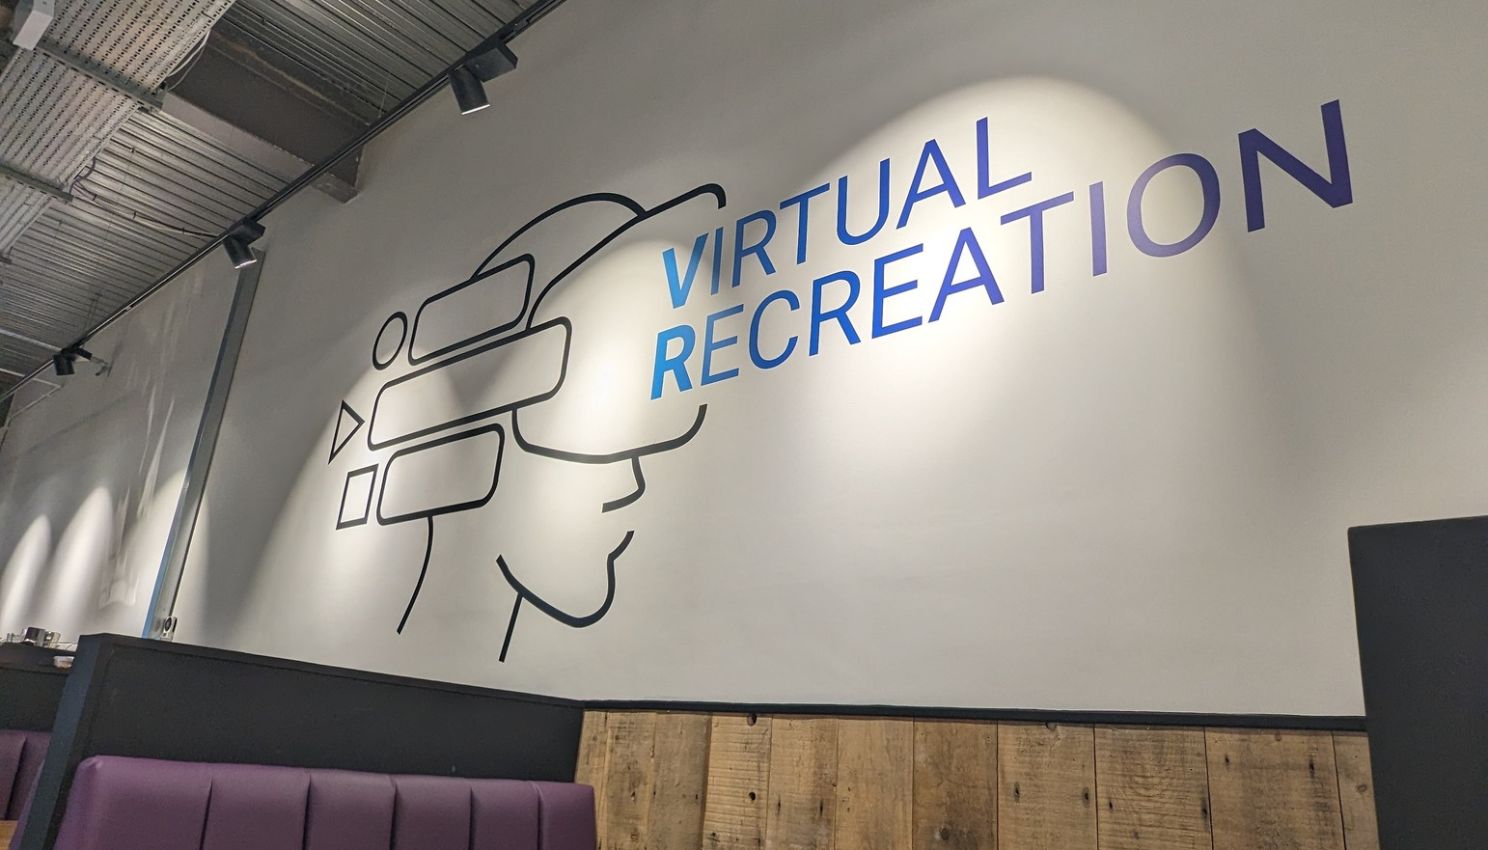 The Virtual Recreation logo on the wall inside their business